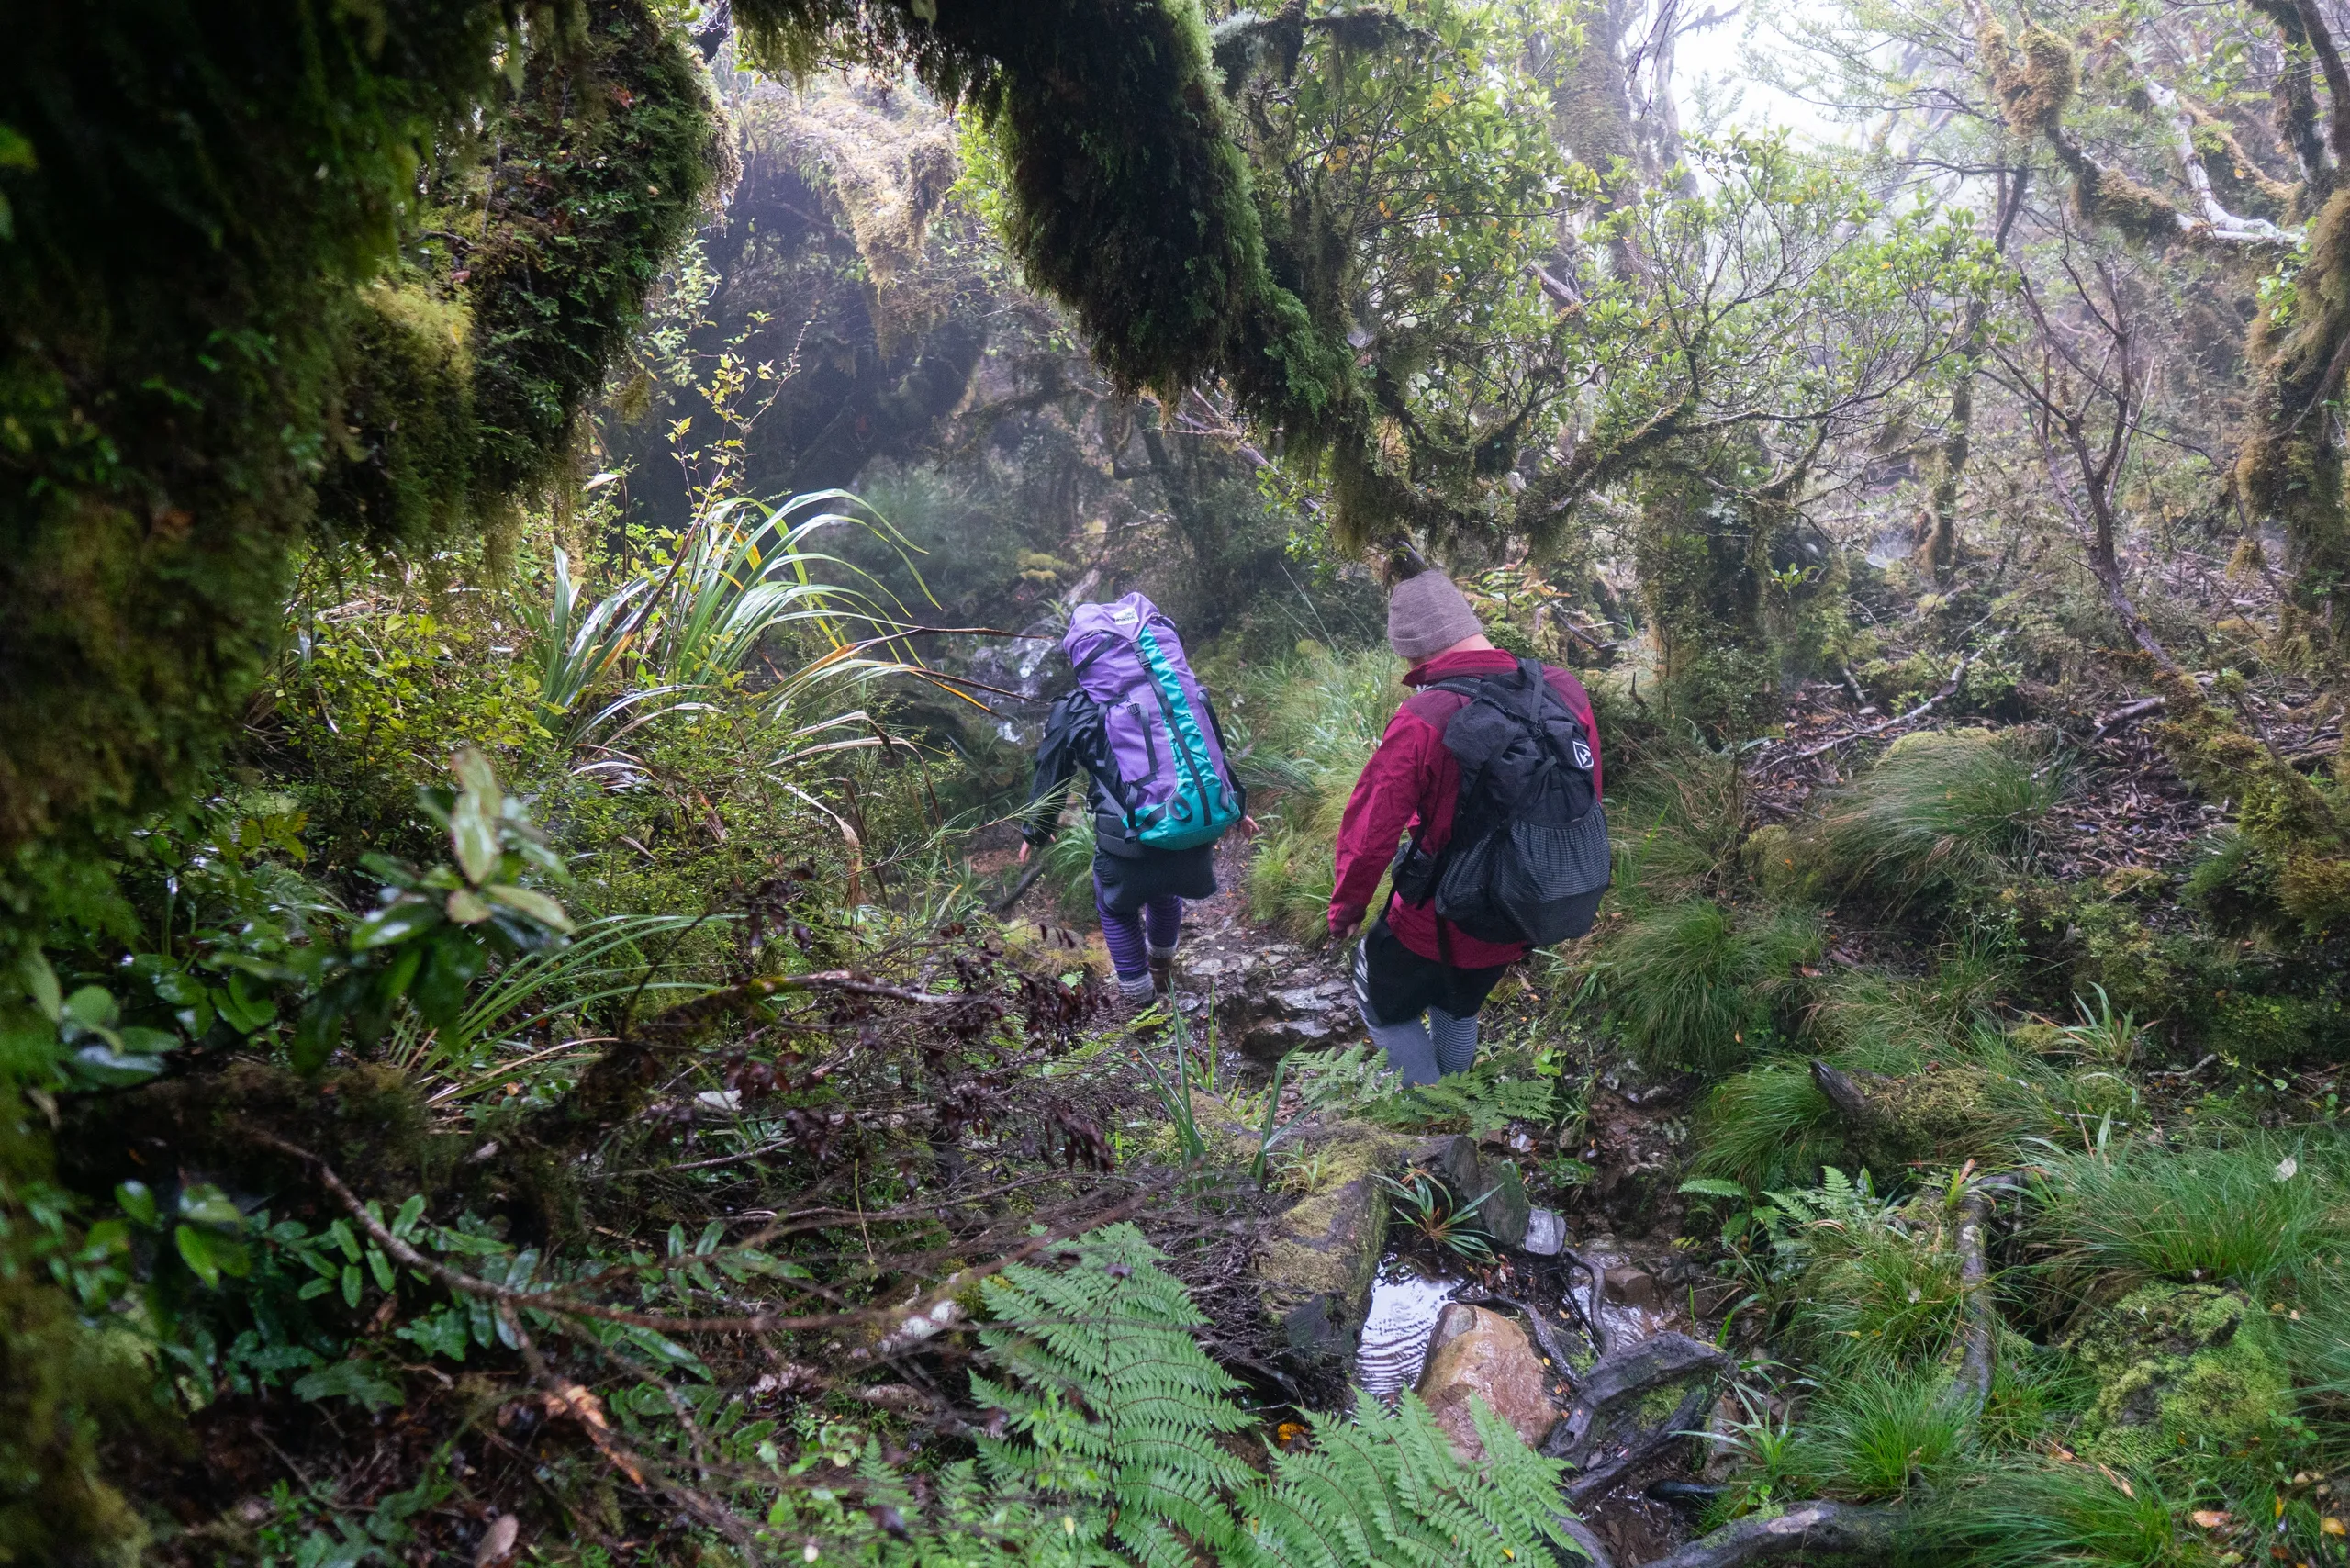 Descending down the trail into foggy forest, shortly after the hut